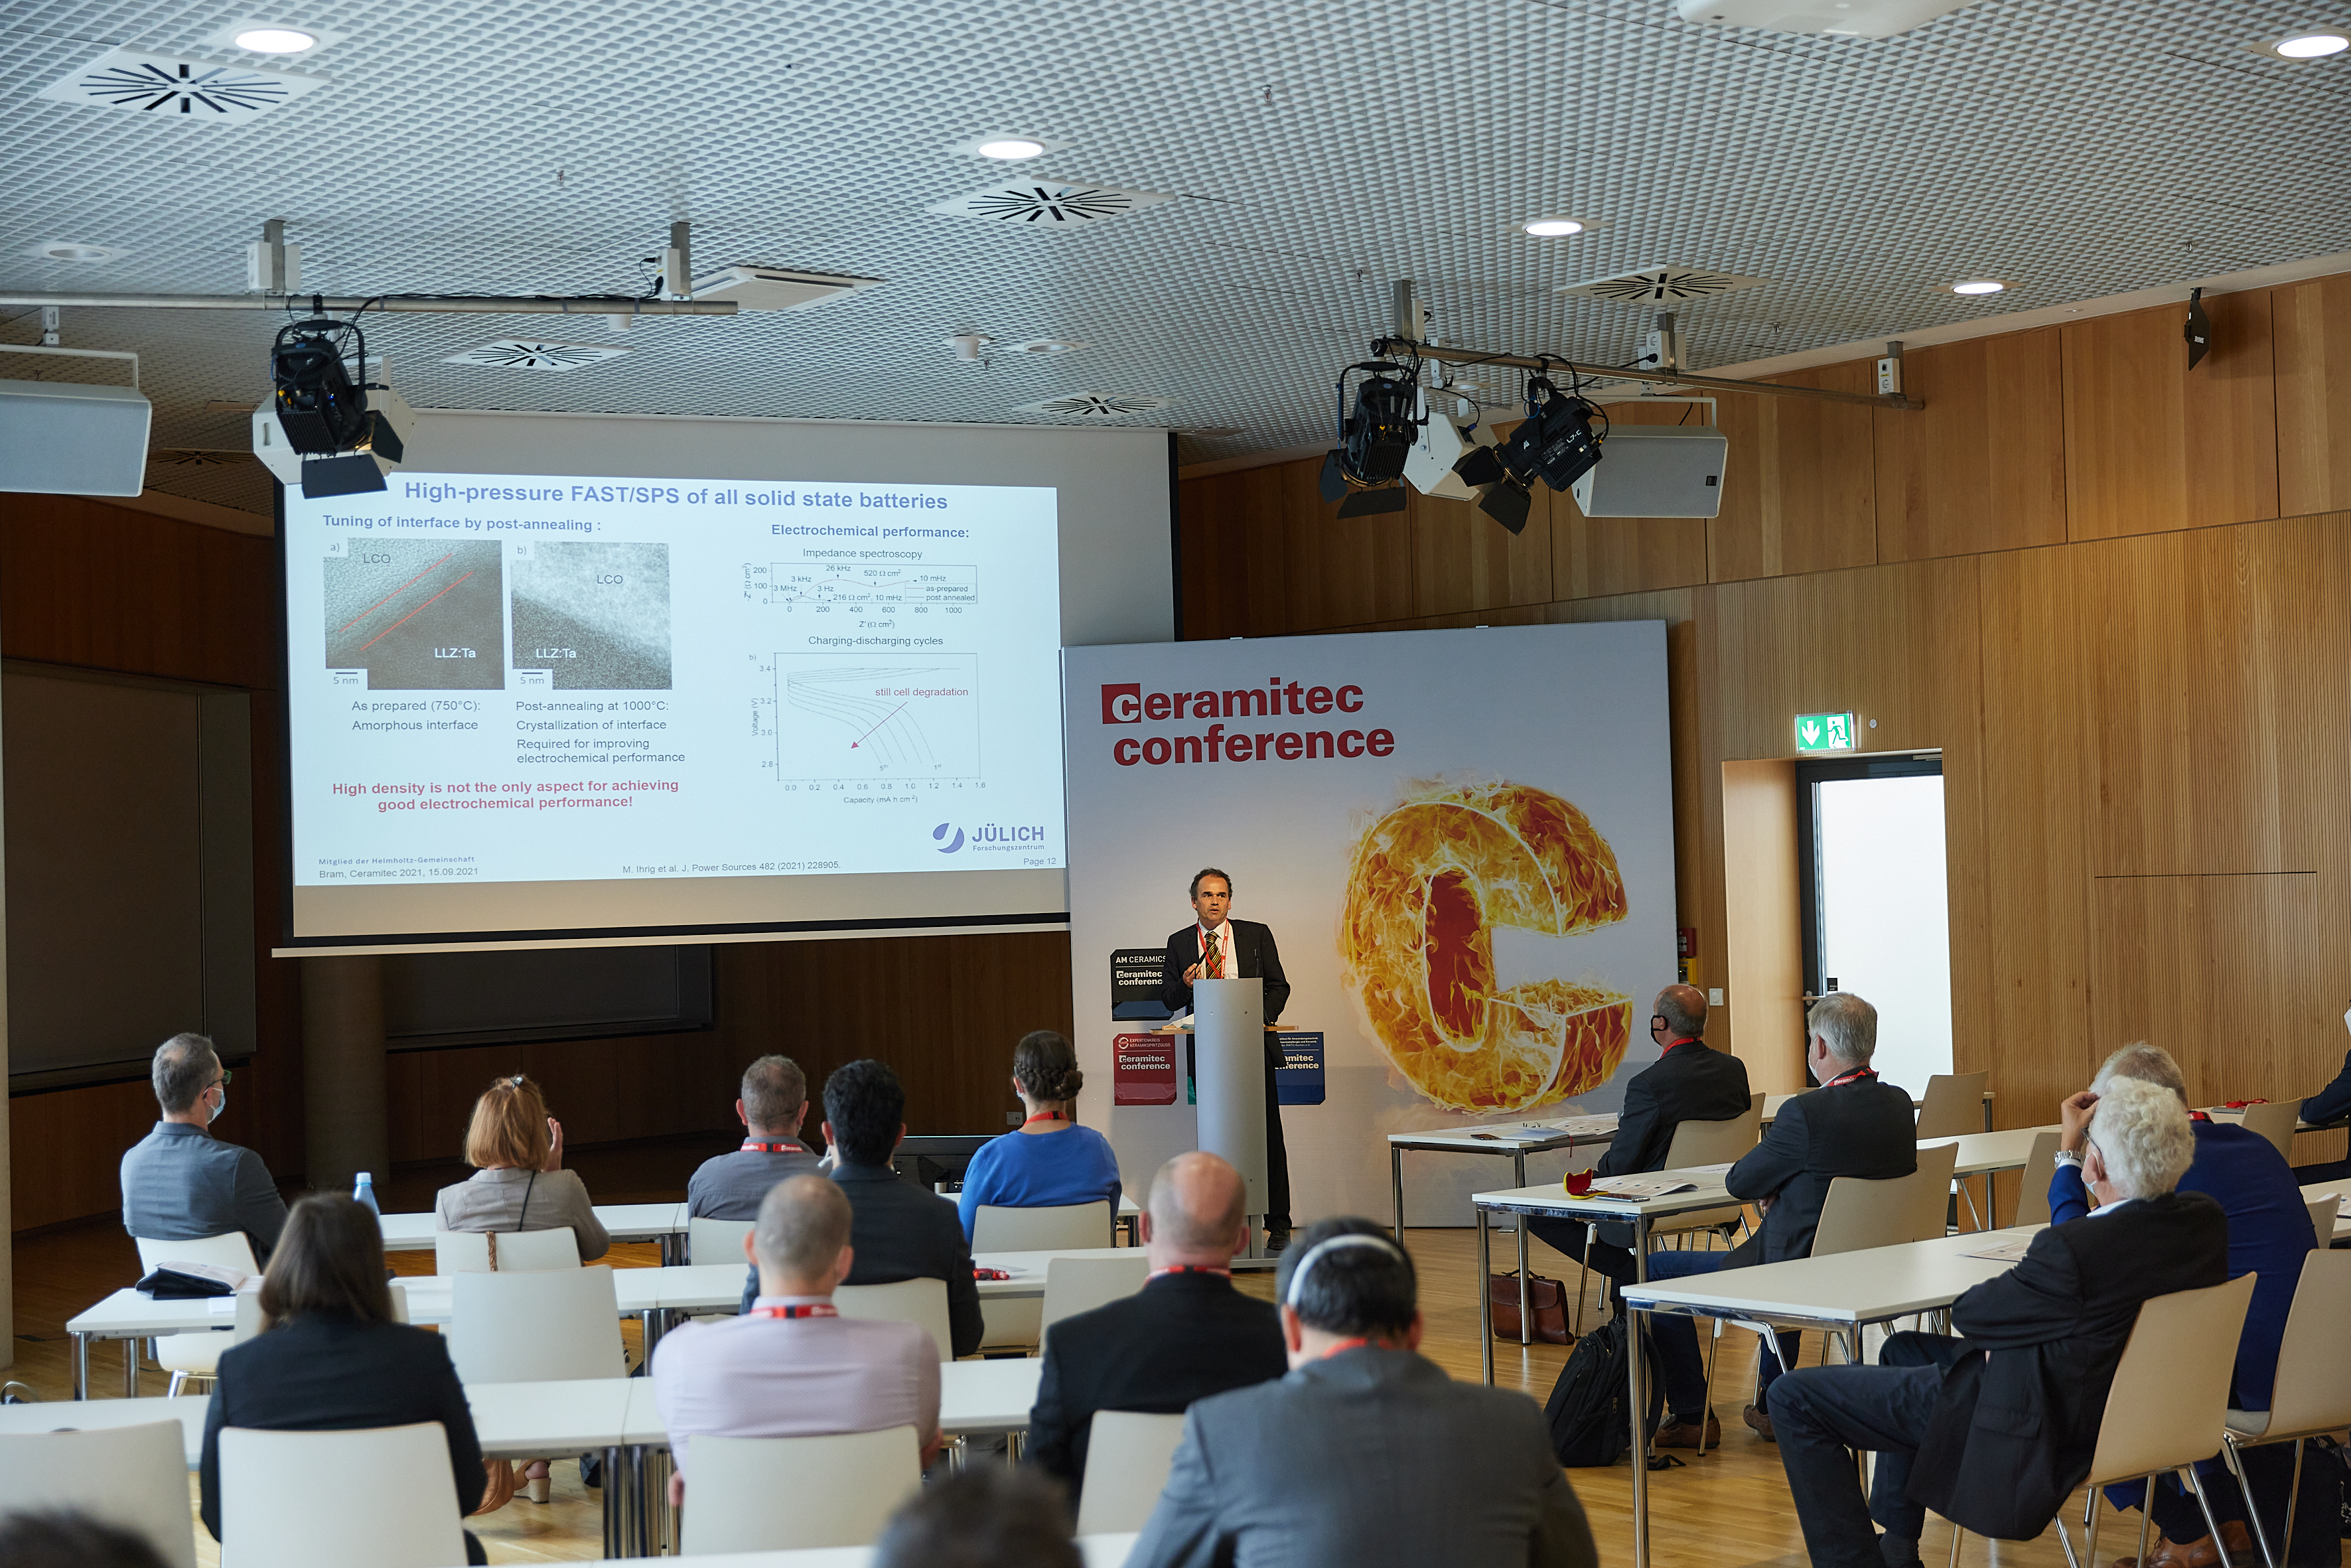 The September 2021 ceramitec conference attracted around 300 participants from 18 countries.